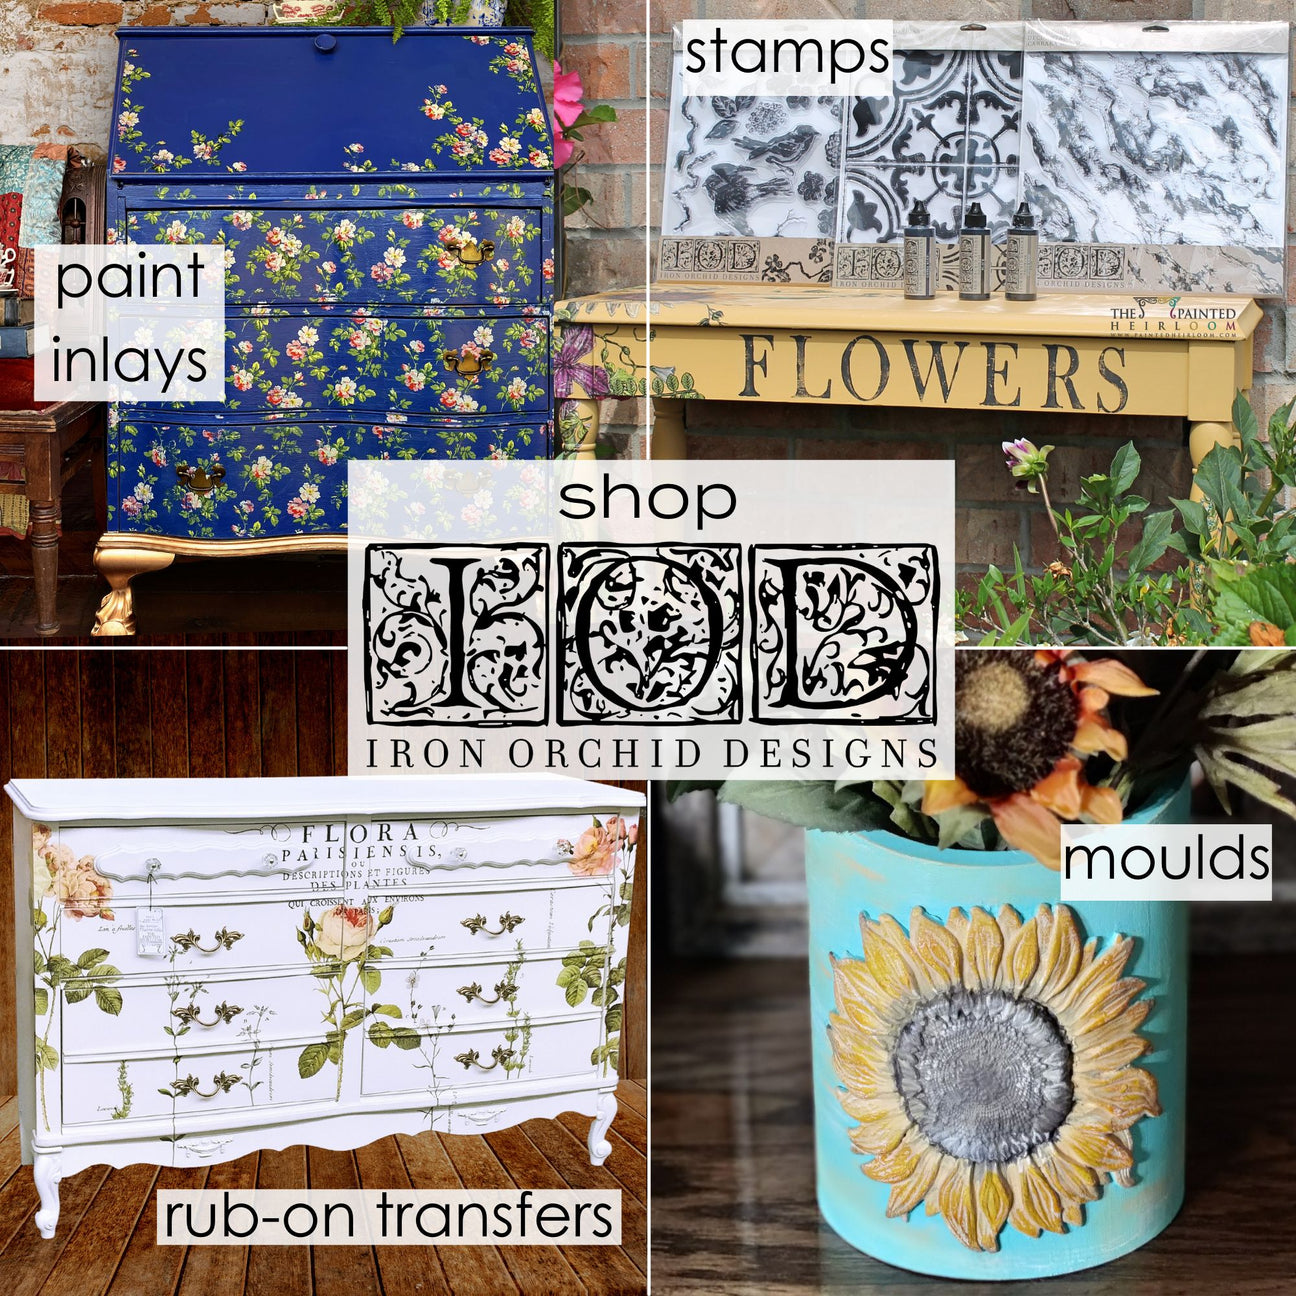 Buy IOD - Iron Orchid Designs @ The Painted Heirloom